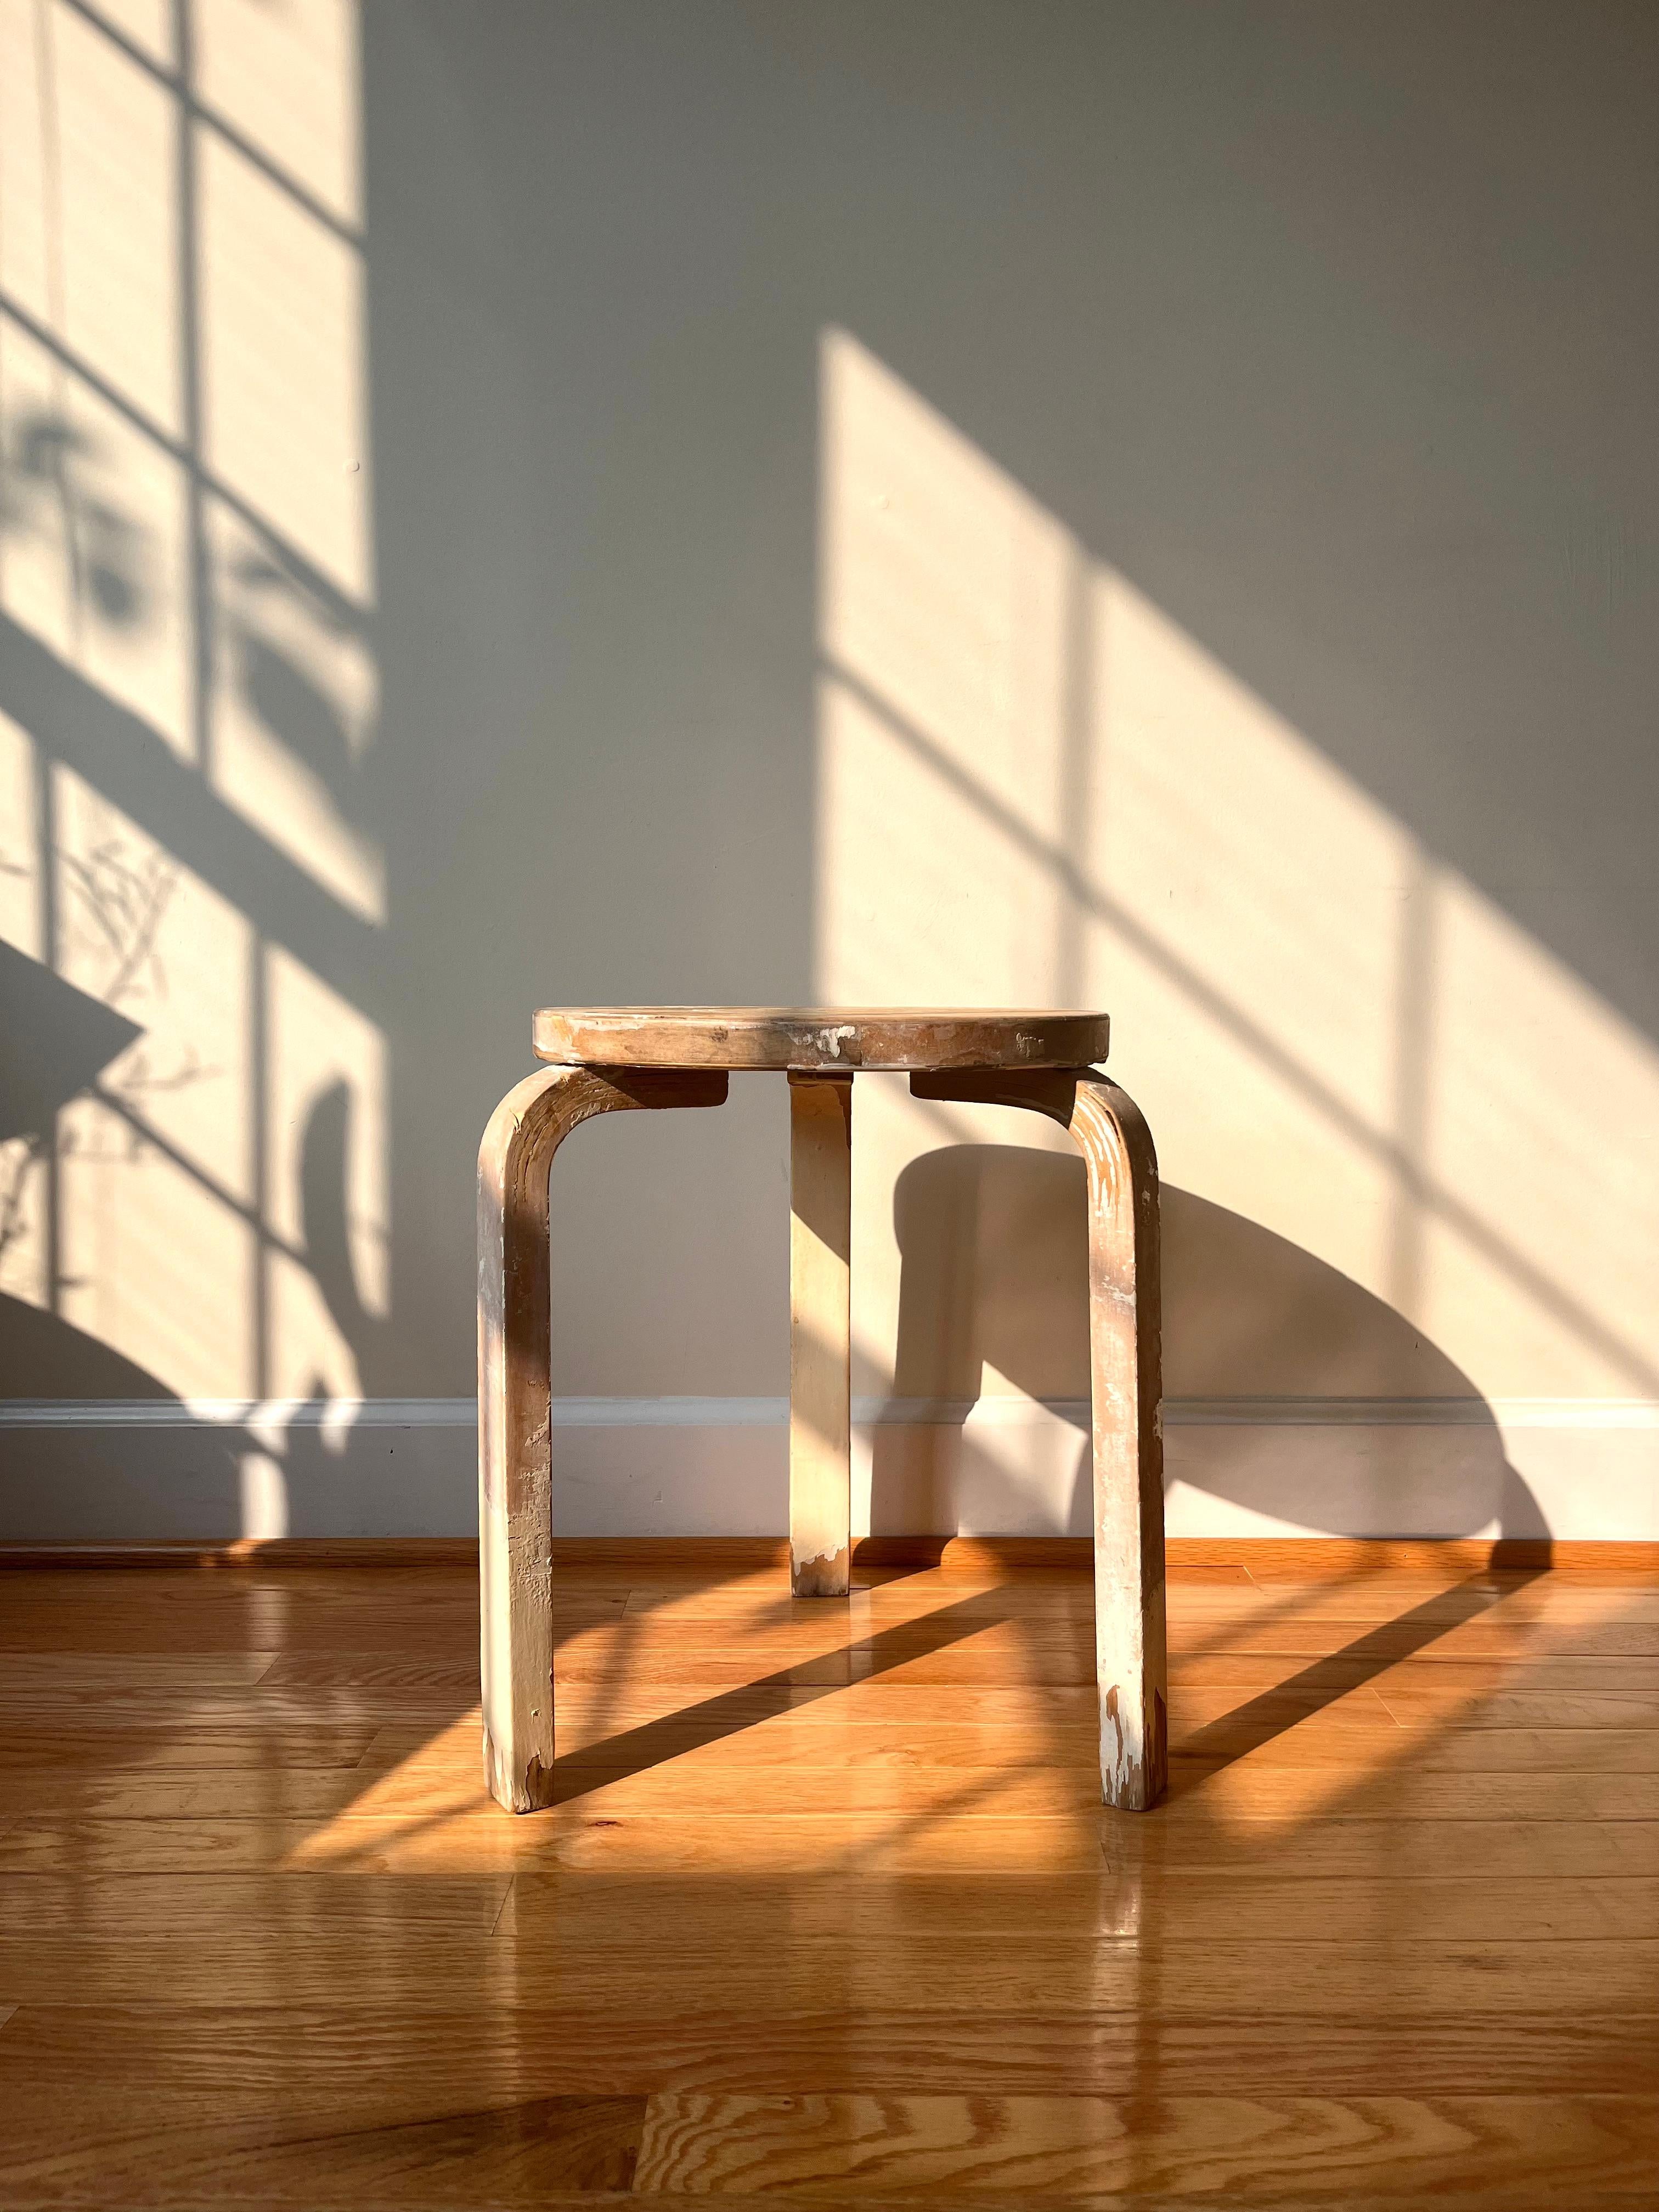 Alvar Aalto's iconic Stool 60 is the most elemental of furniture pieces, equally suitable as a seat, a table, storage unit, or display surface. 

Born of modernist ideals and Finnish innovation, its great legacy and continued relevance owe much to